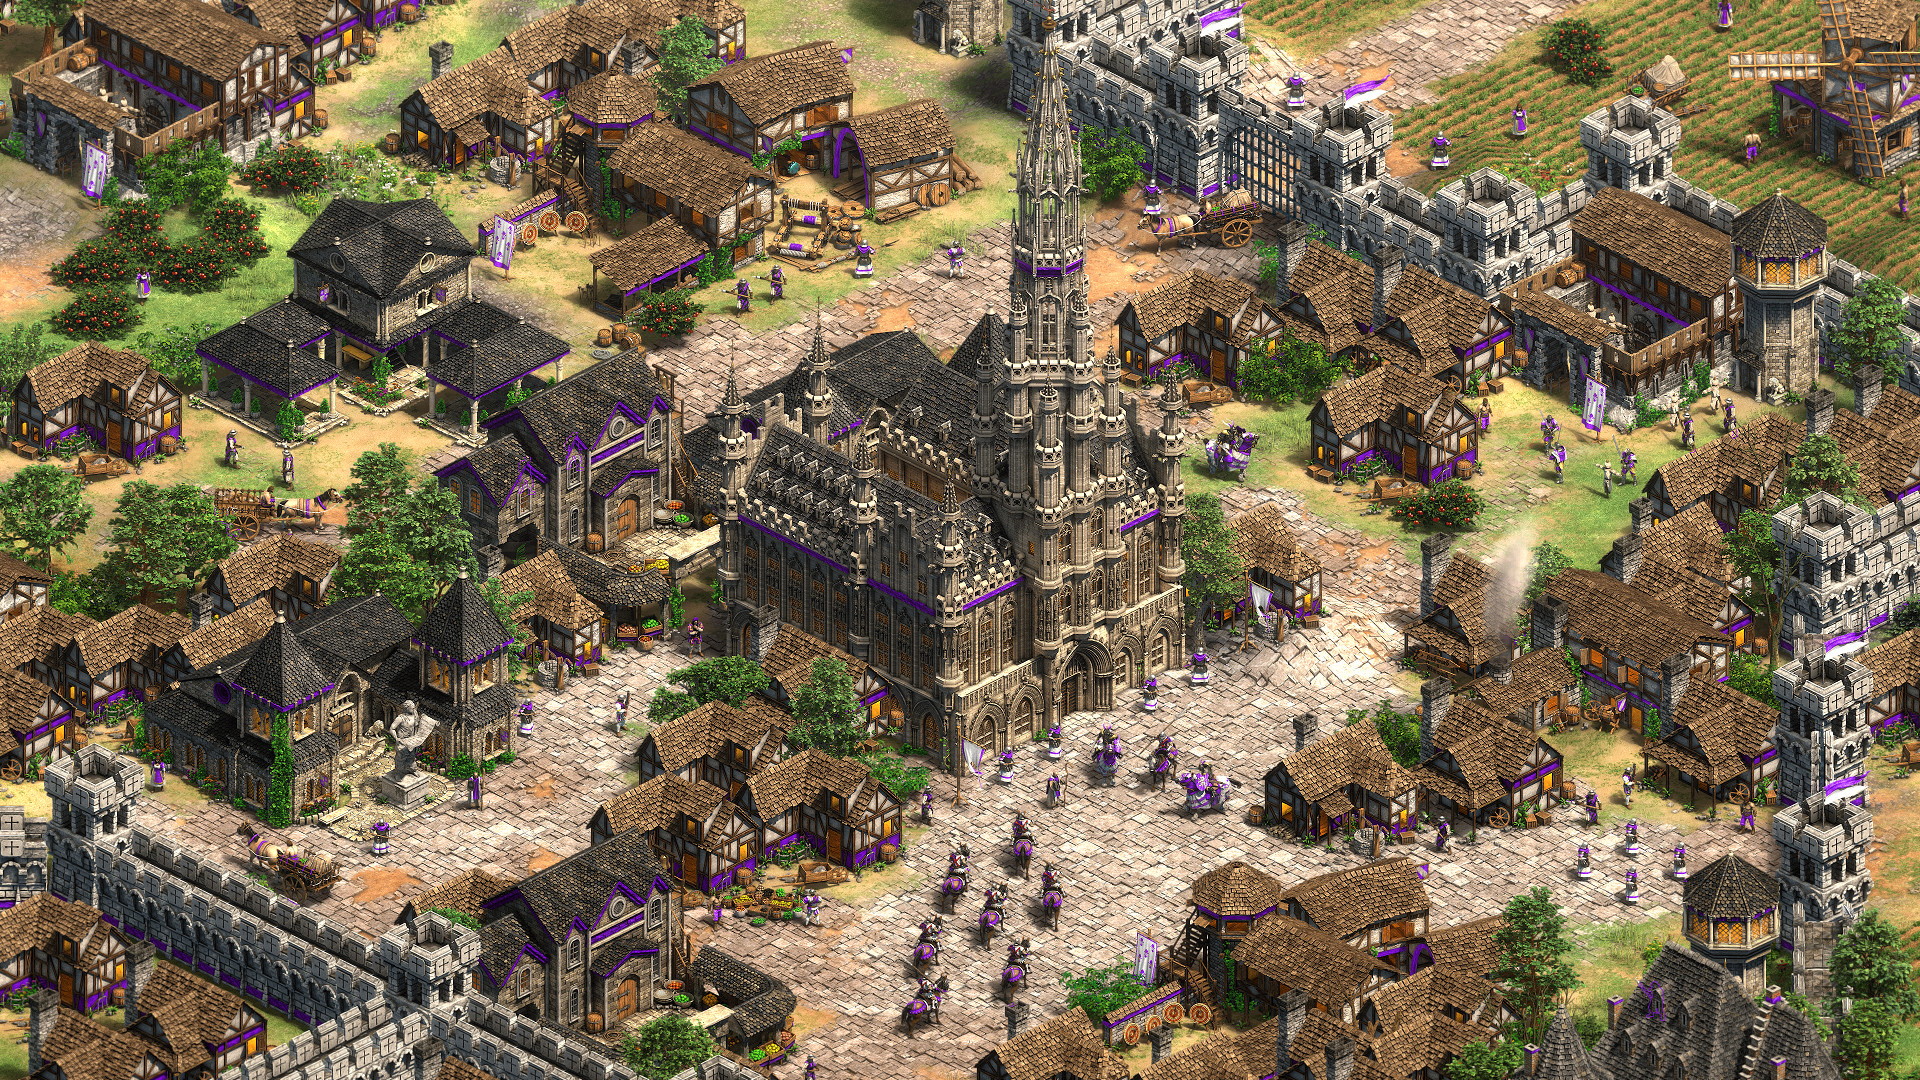 Age of Empires II: Definitive Edition - Lords of the West - screenshot 1